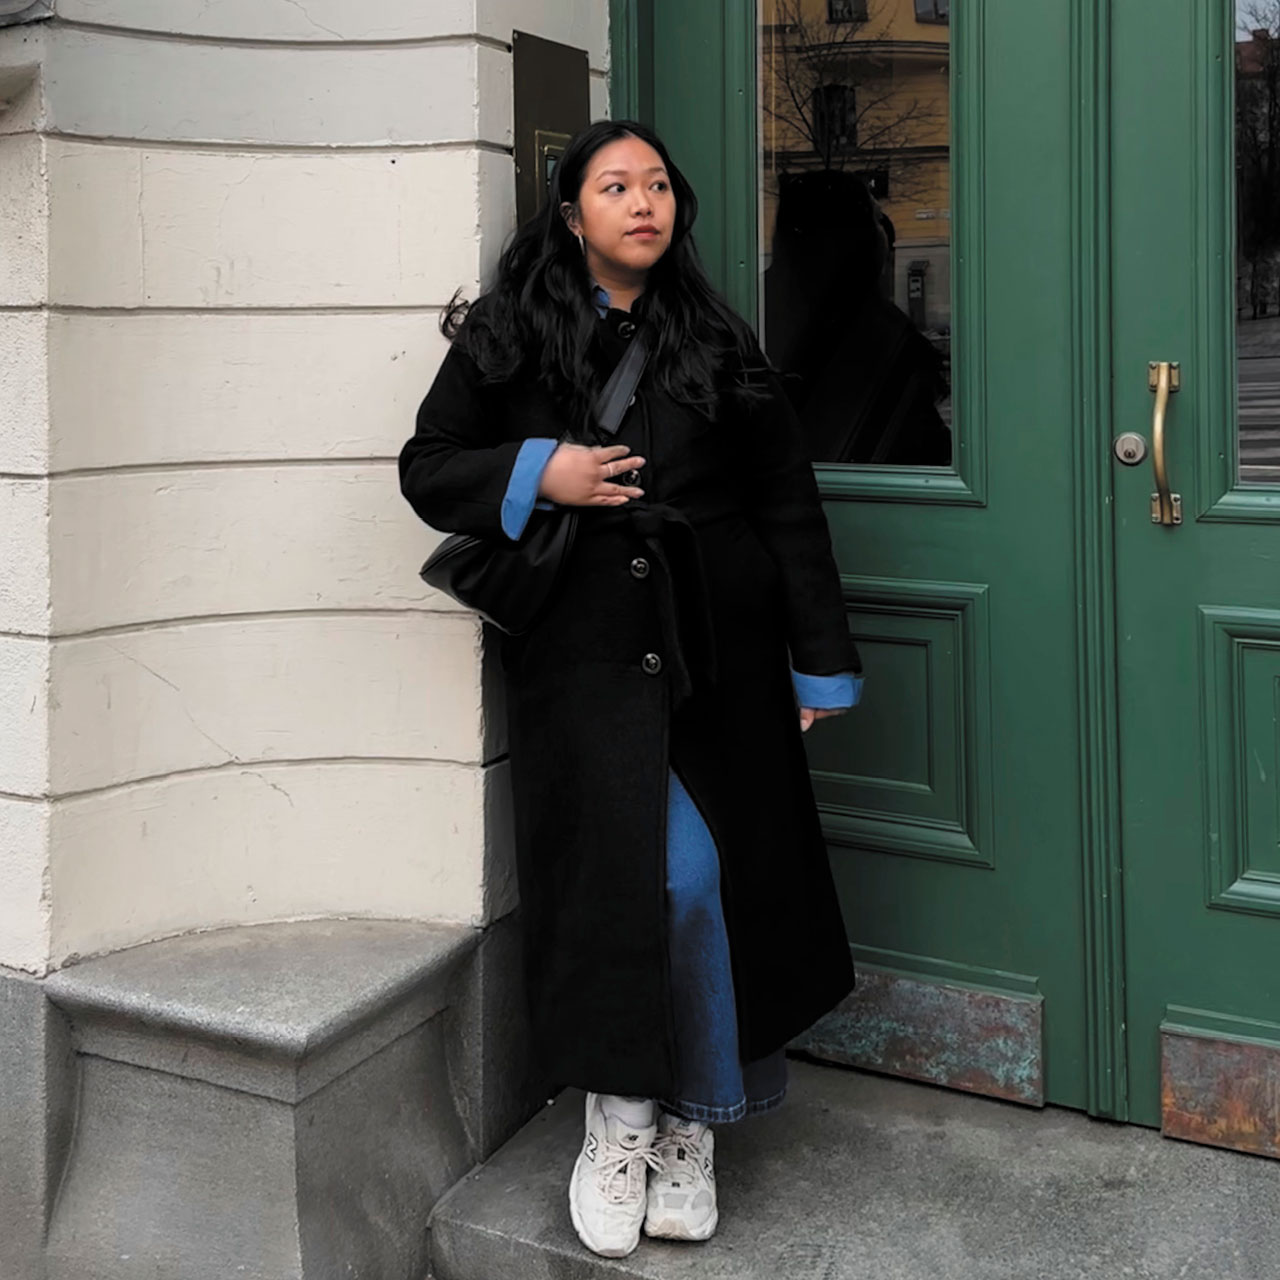 The writer in a black coat in front of a green door